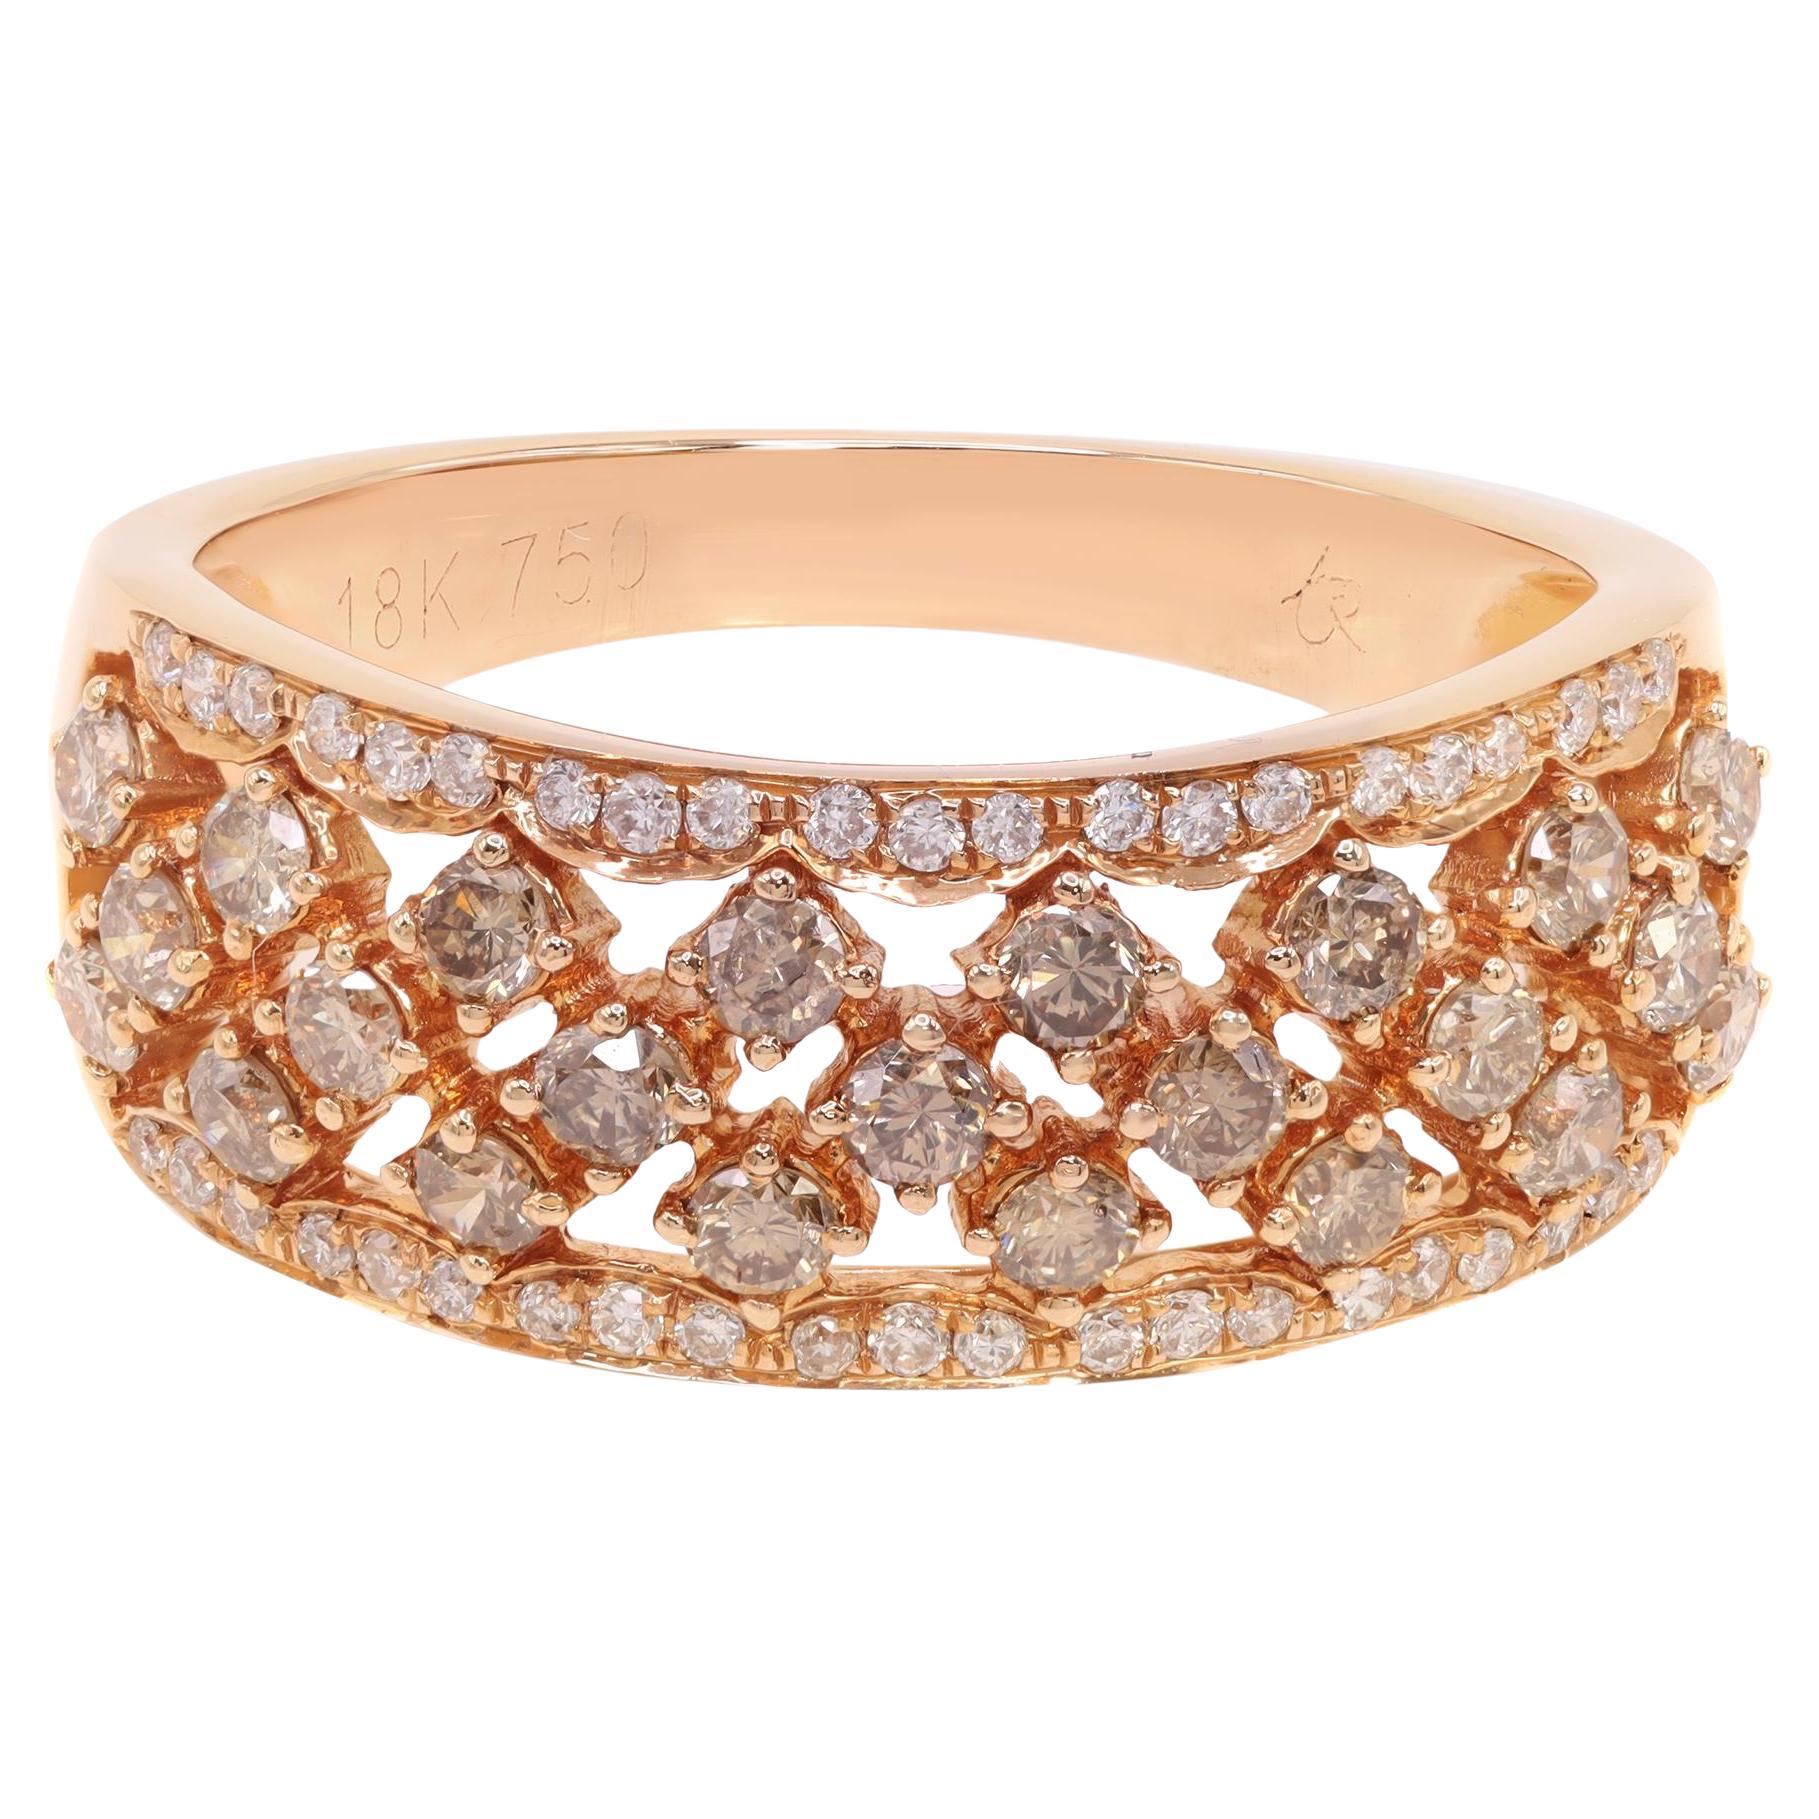 Rachel Koen Brown and White Diamond Wide Band 18K Rose Gold 0.89Cttw For Sale